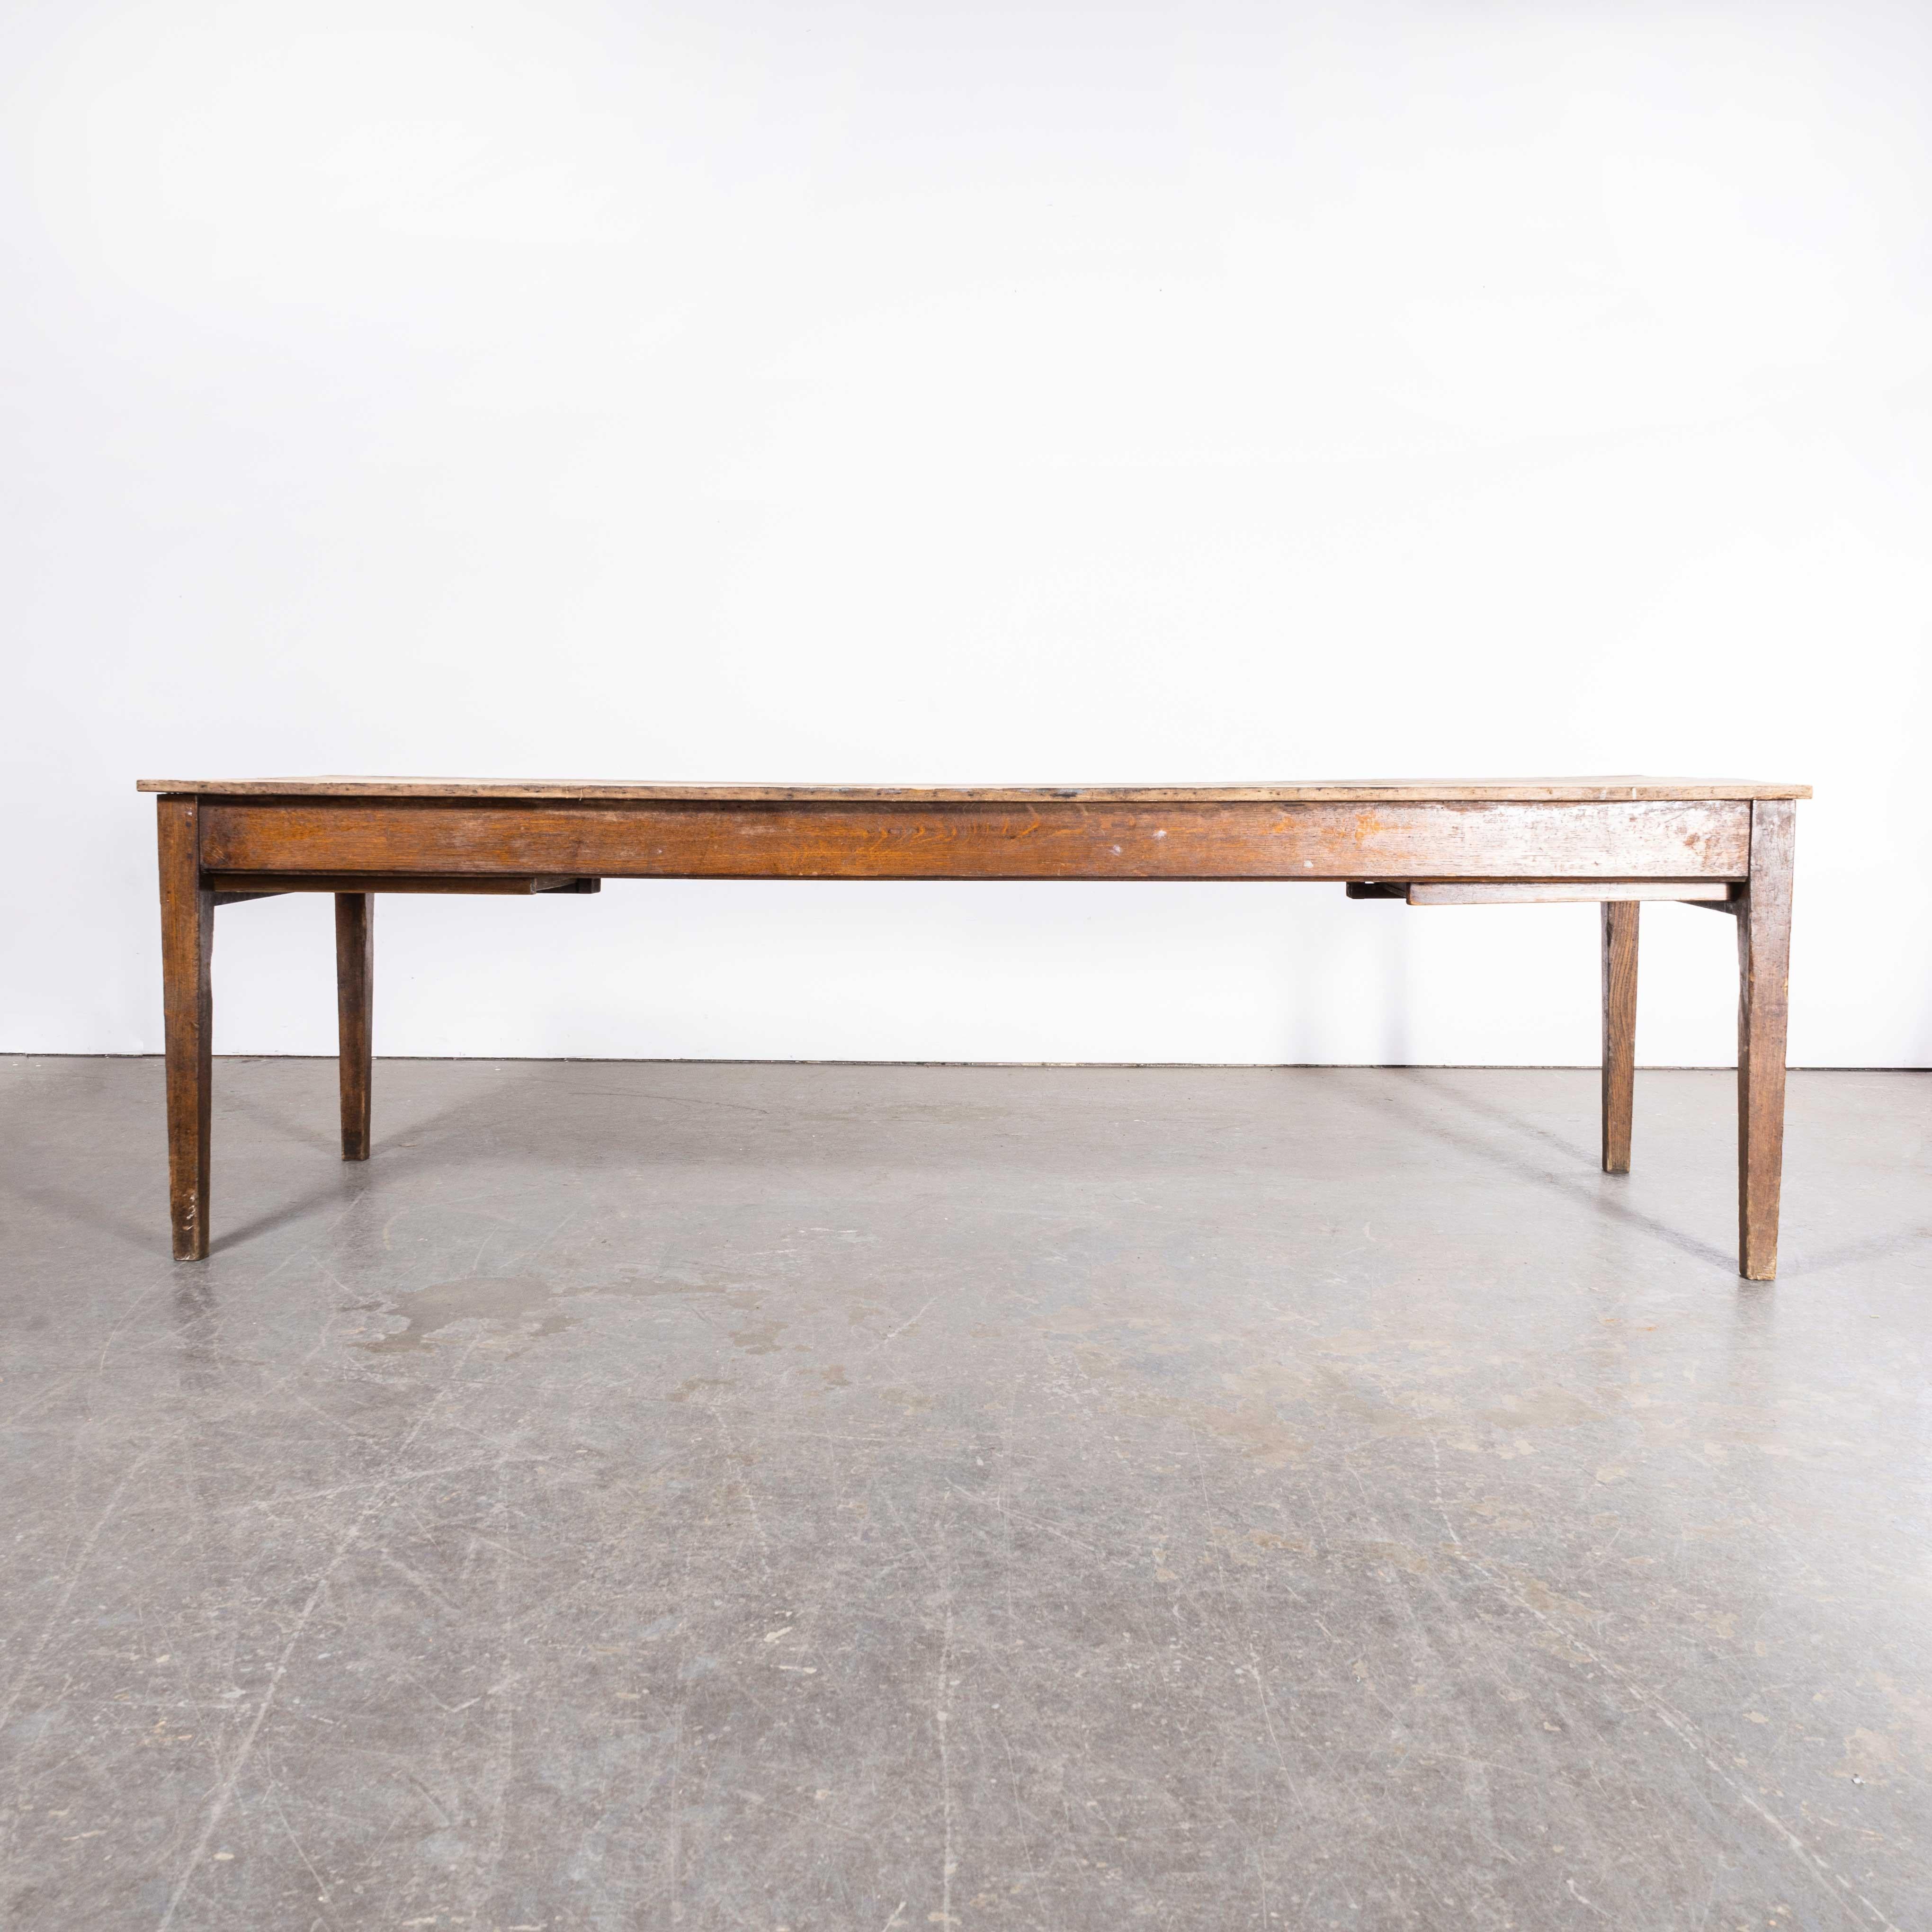 1920’s French Wild Oak Rectangular Farmhouse Dining Table – Scrubbed Top
1920’s French Wild Oak Rectangular Farmhouse Dining Table – Planked Top. Good original French classic farmhouse table made from solid oak throughout. The table is original